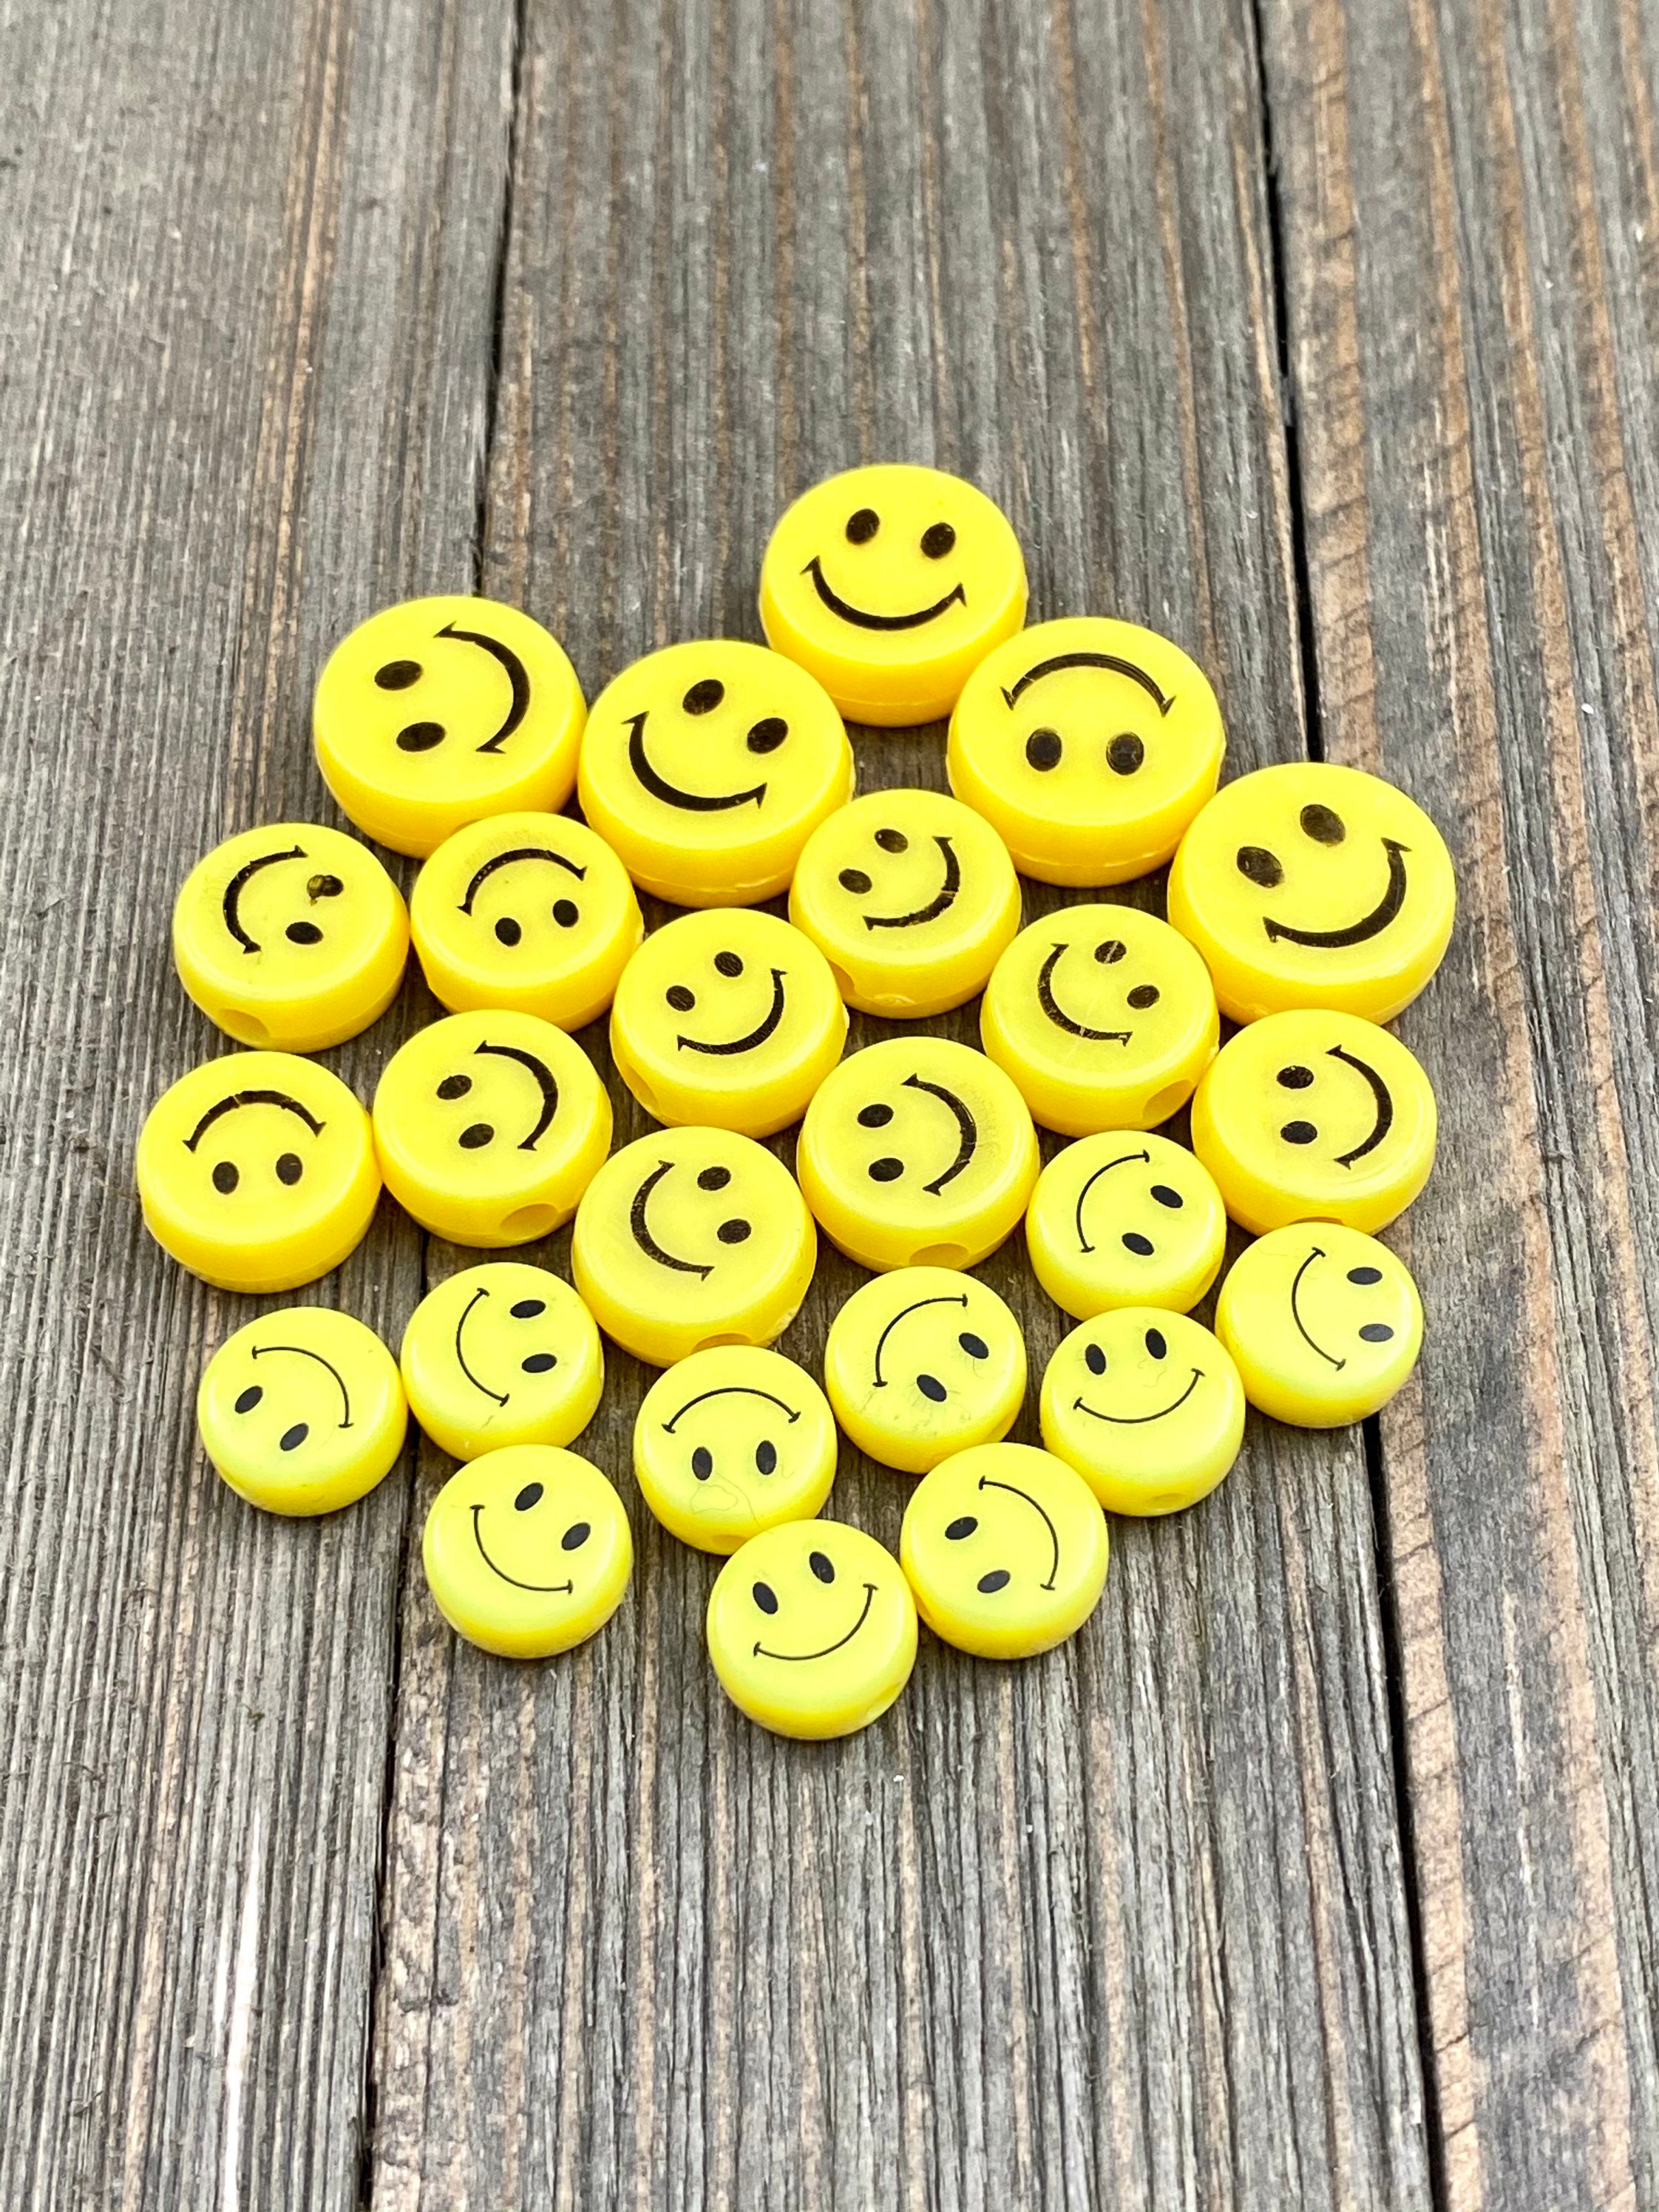 10mm Acrylic Heart Smiley Face Beads, High Quality Beads, Focal